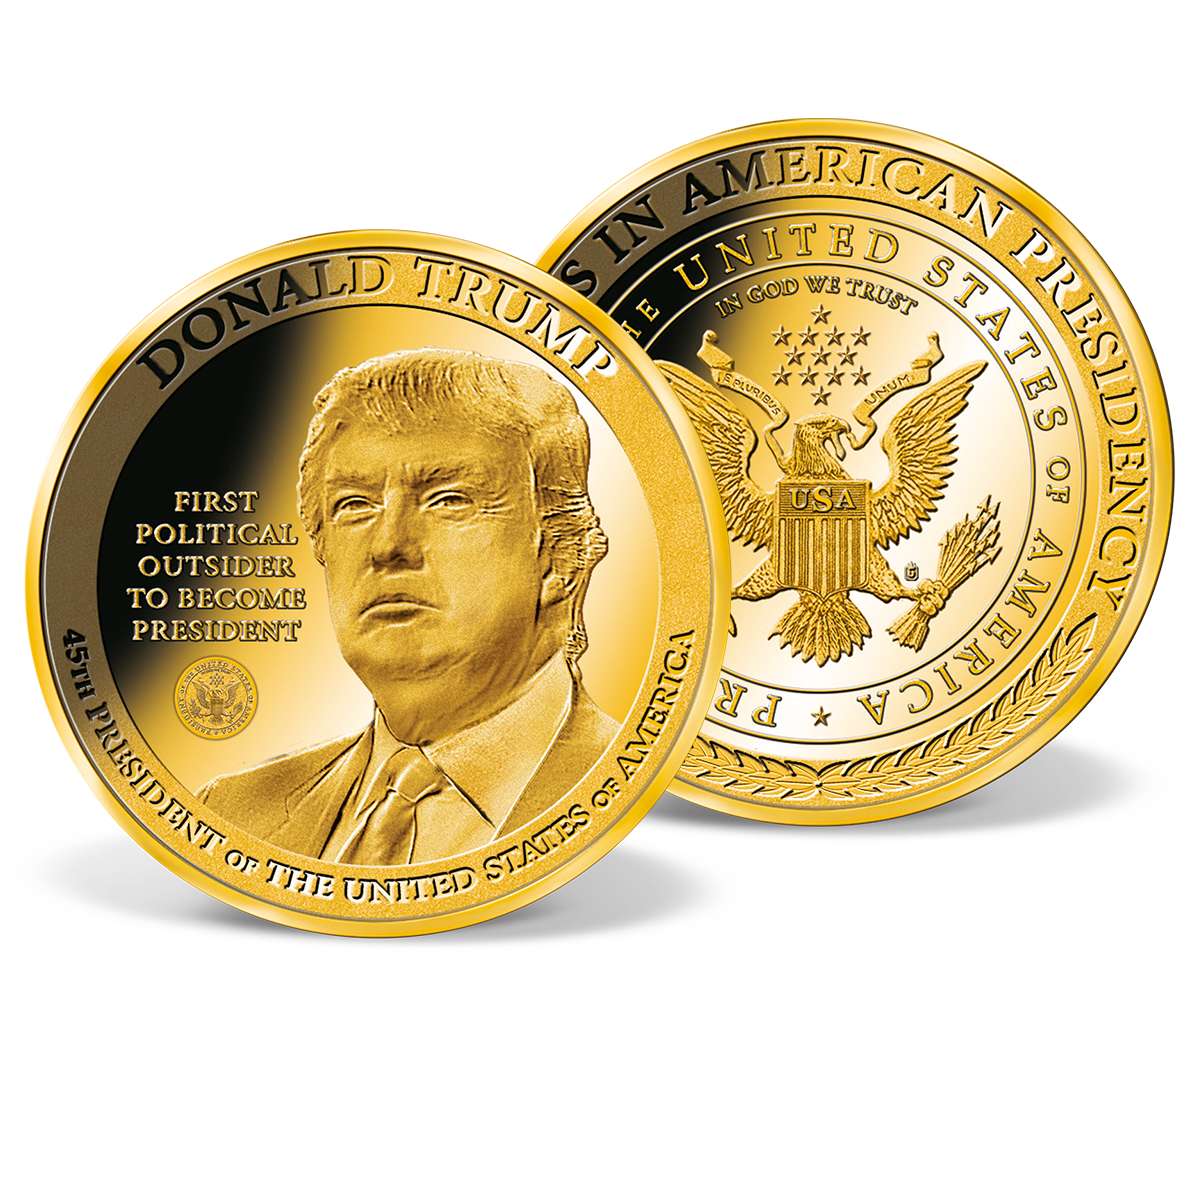 Authentic 24k Gold Collectible Coin of 45th United States President Republican Collectibles Challenge Memorabilia Gift CASE INCLUDED 2 PACK The Official 2018 Gold Donald Trump Commemorative Coin 